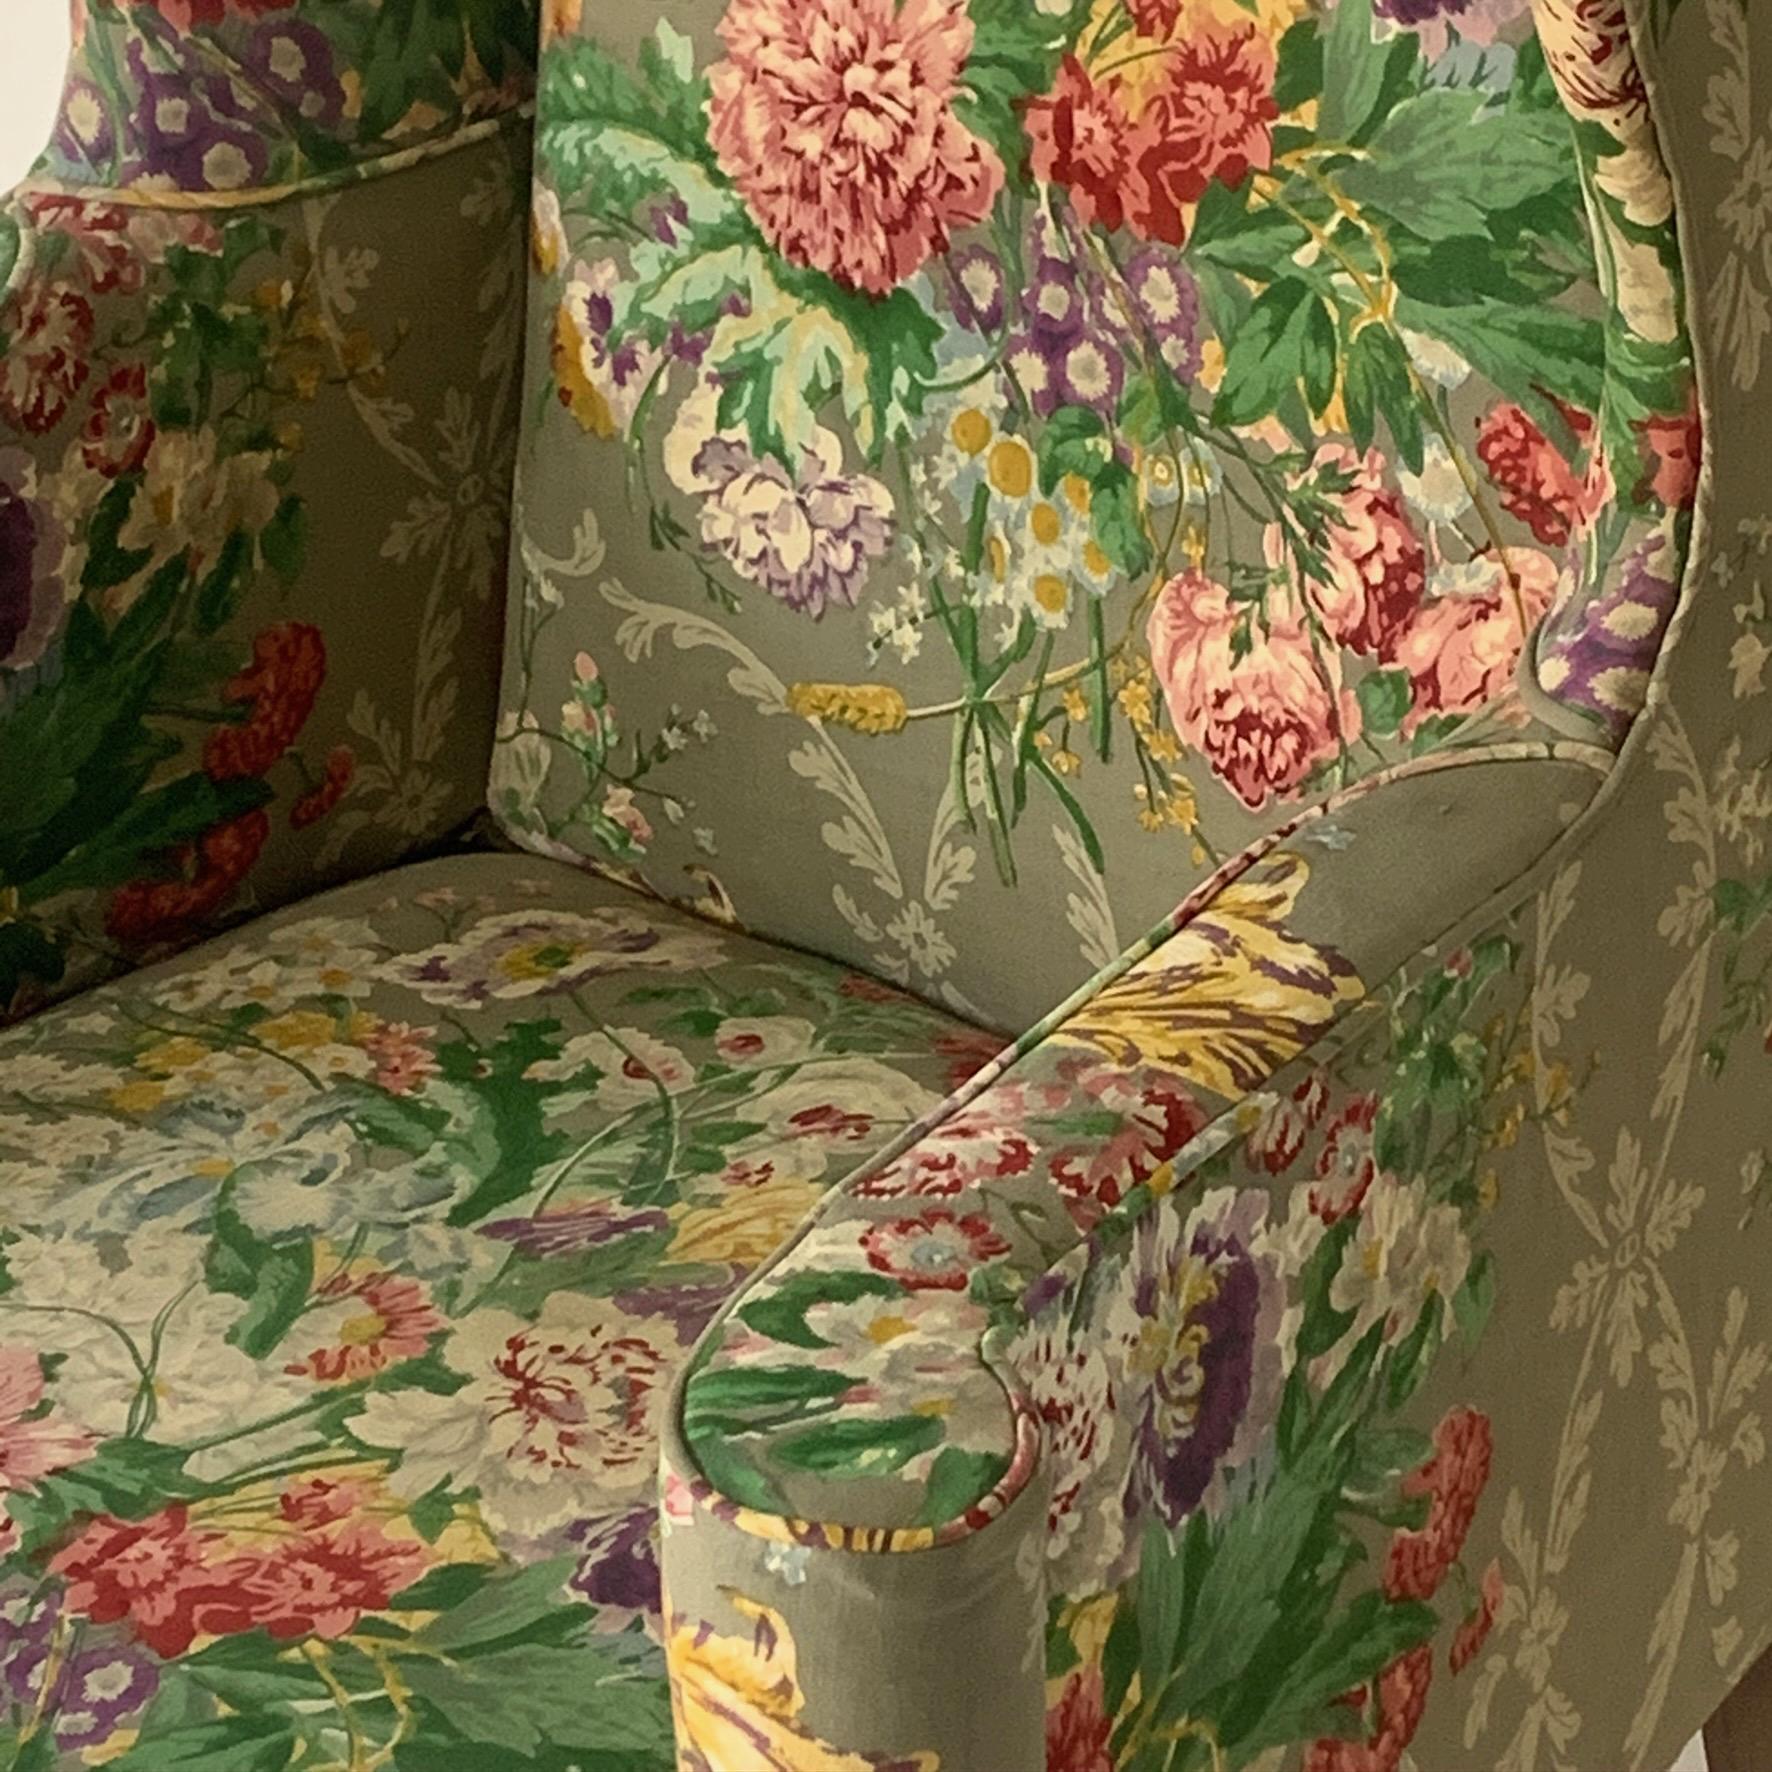 Chippendale Exceptional Early American Wingback Chairs with Stunning Floral Upholstery